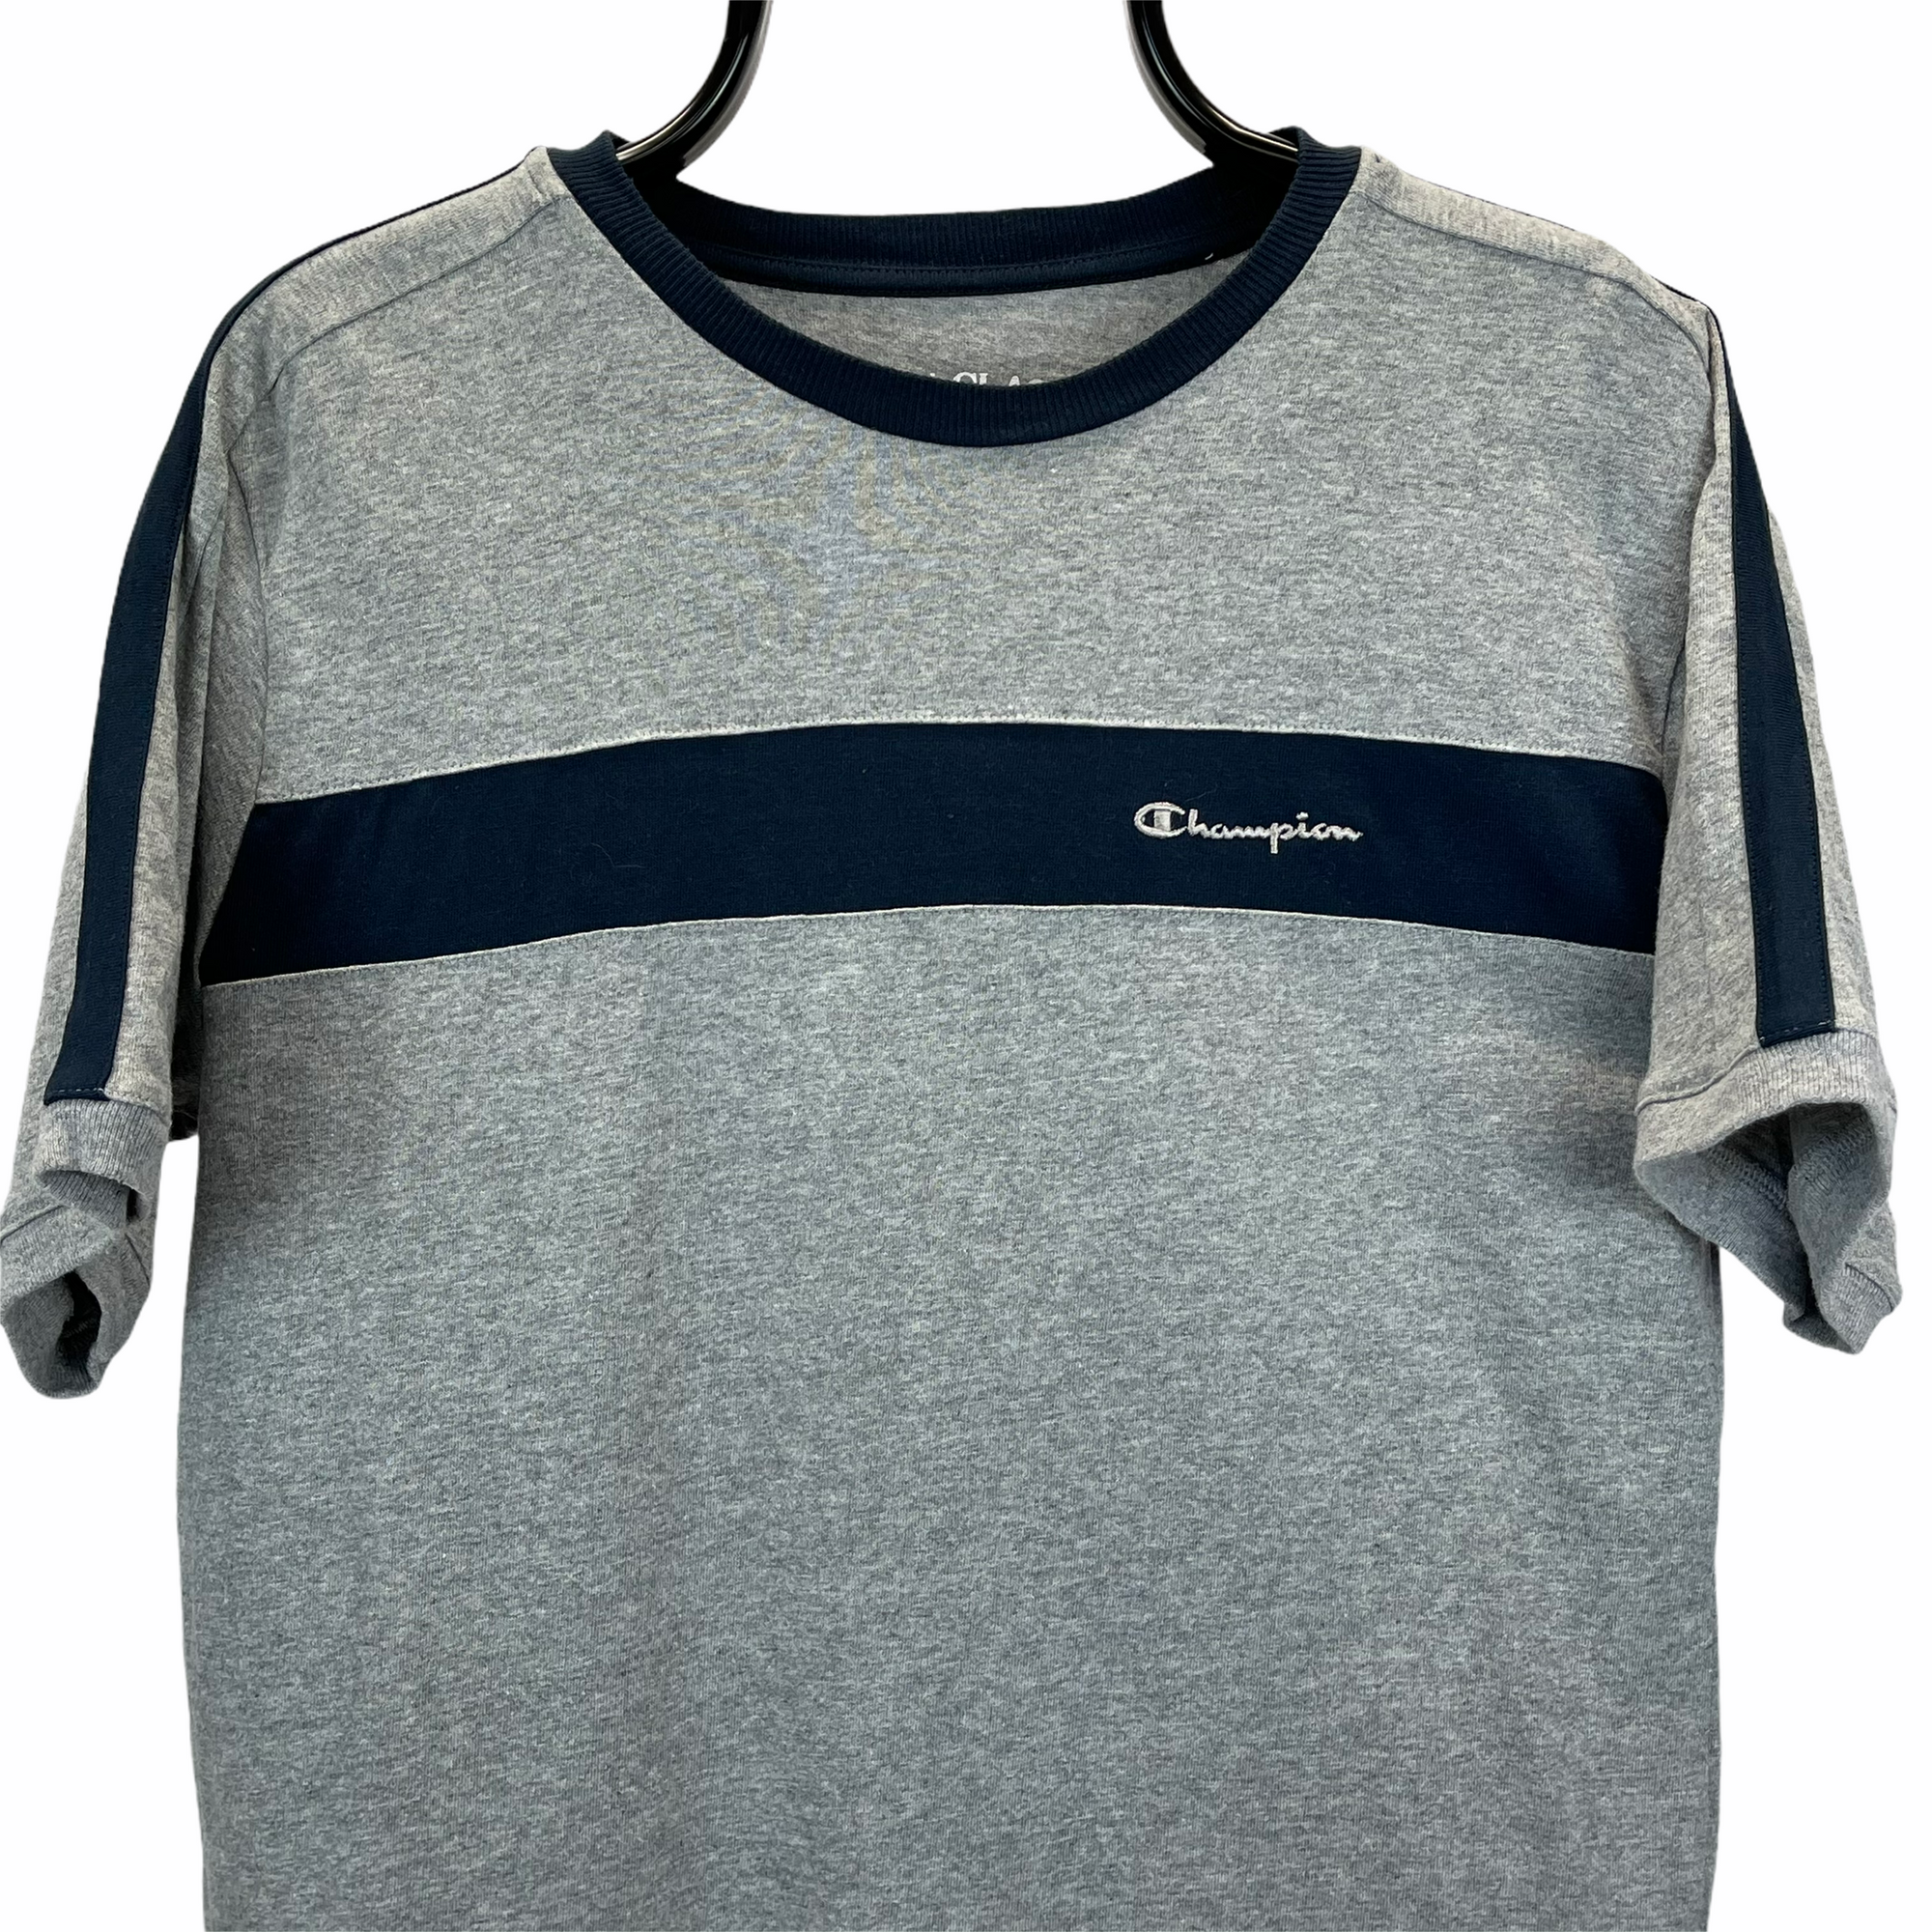 VINTAGE CHAMPION EMBROIDERED SMALL SPELLOUT TEE IN GREY & NAVY - MEN'S MEDIUM/WOMEN'S LARGE